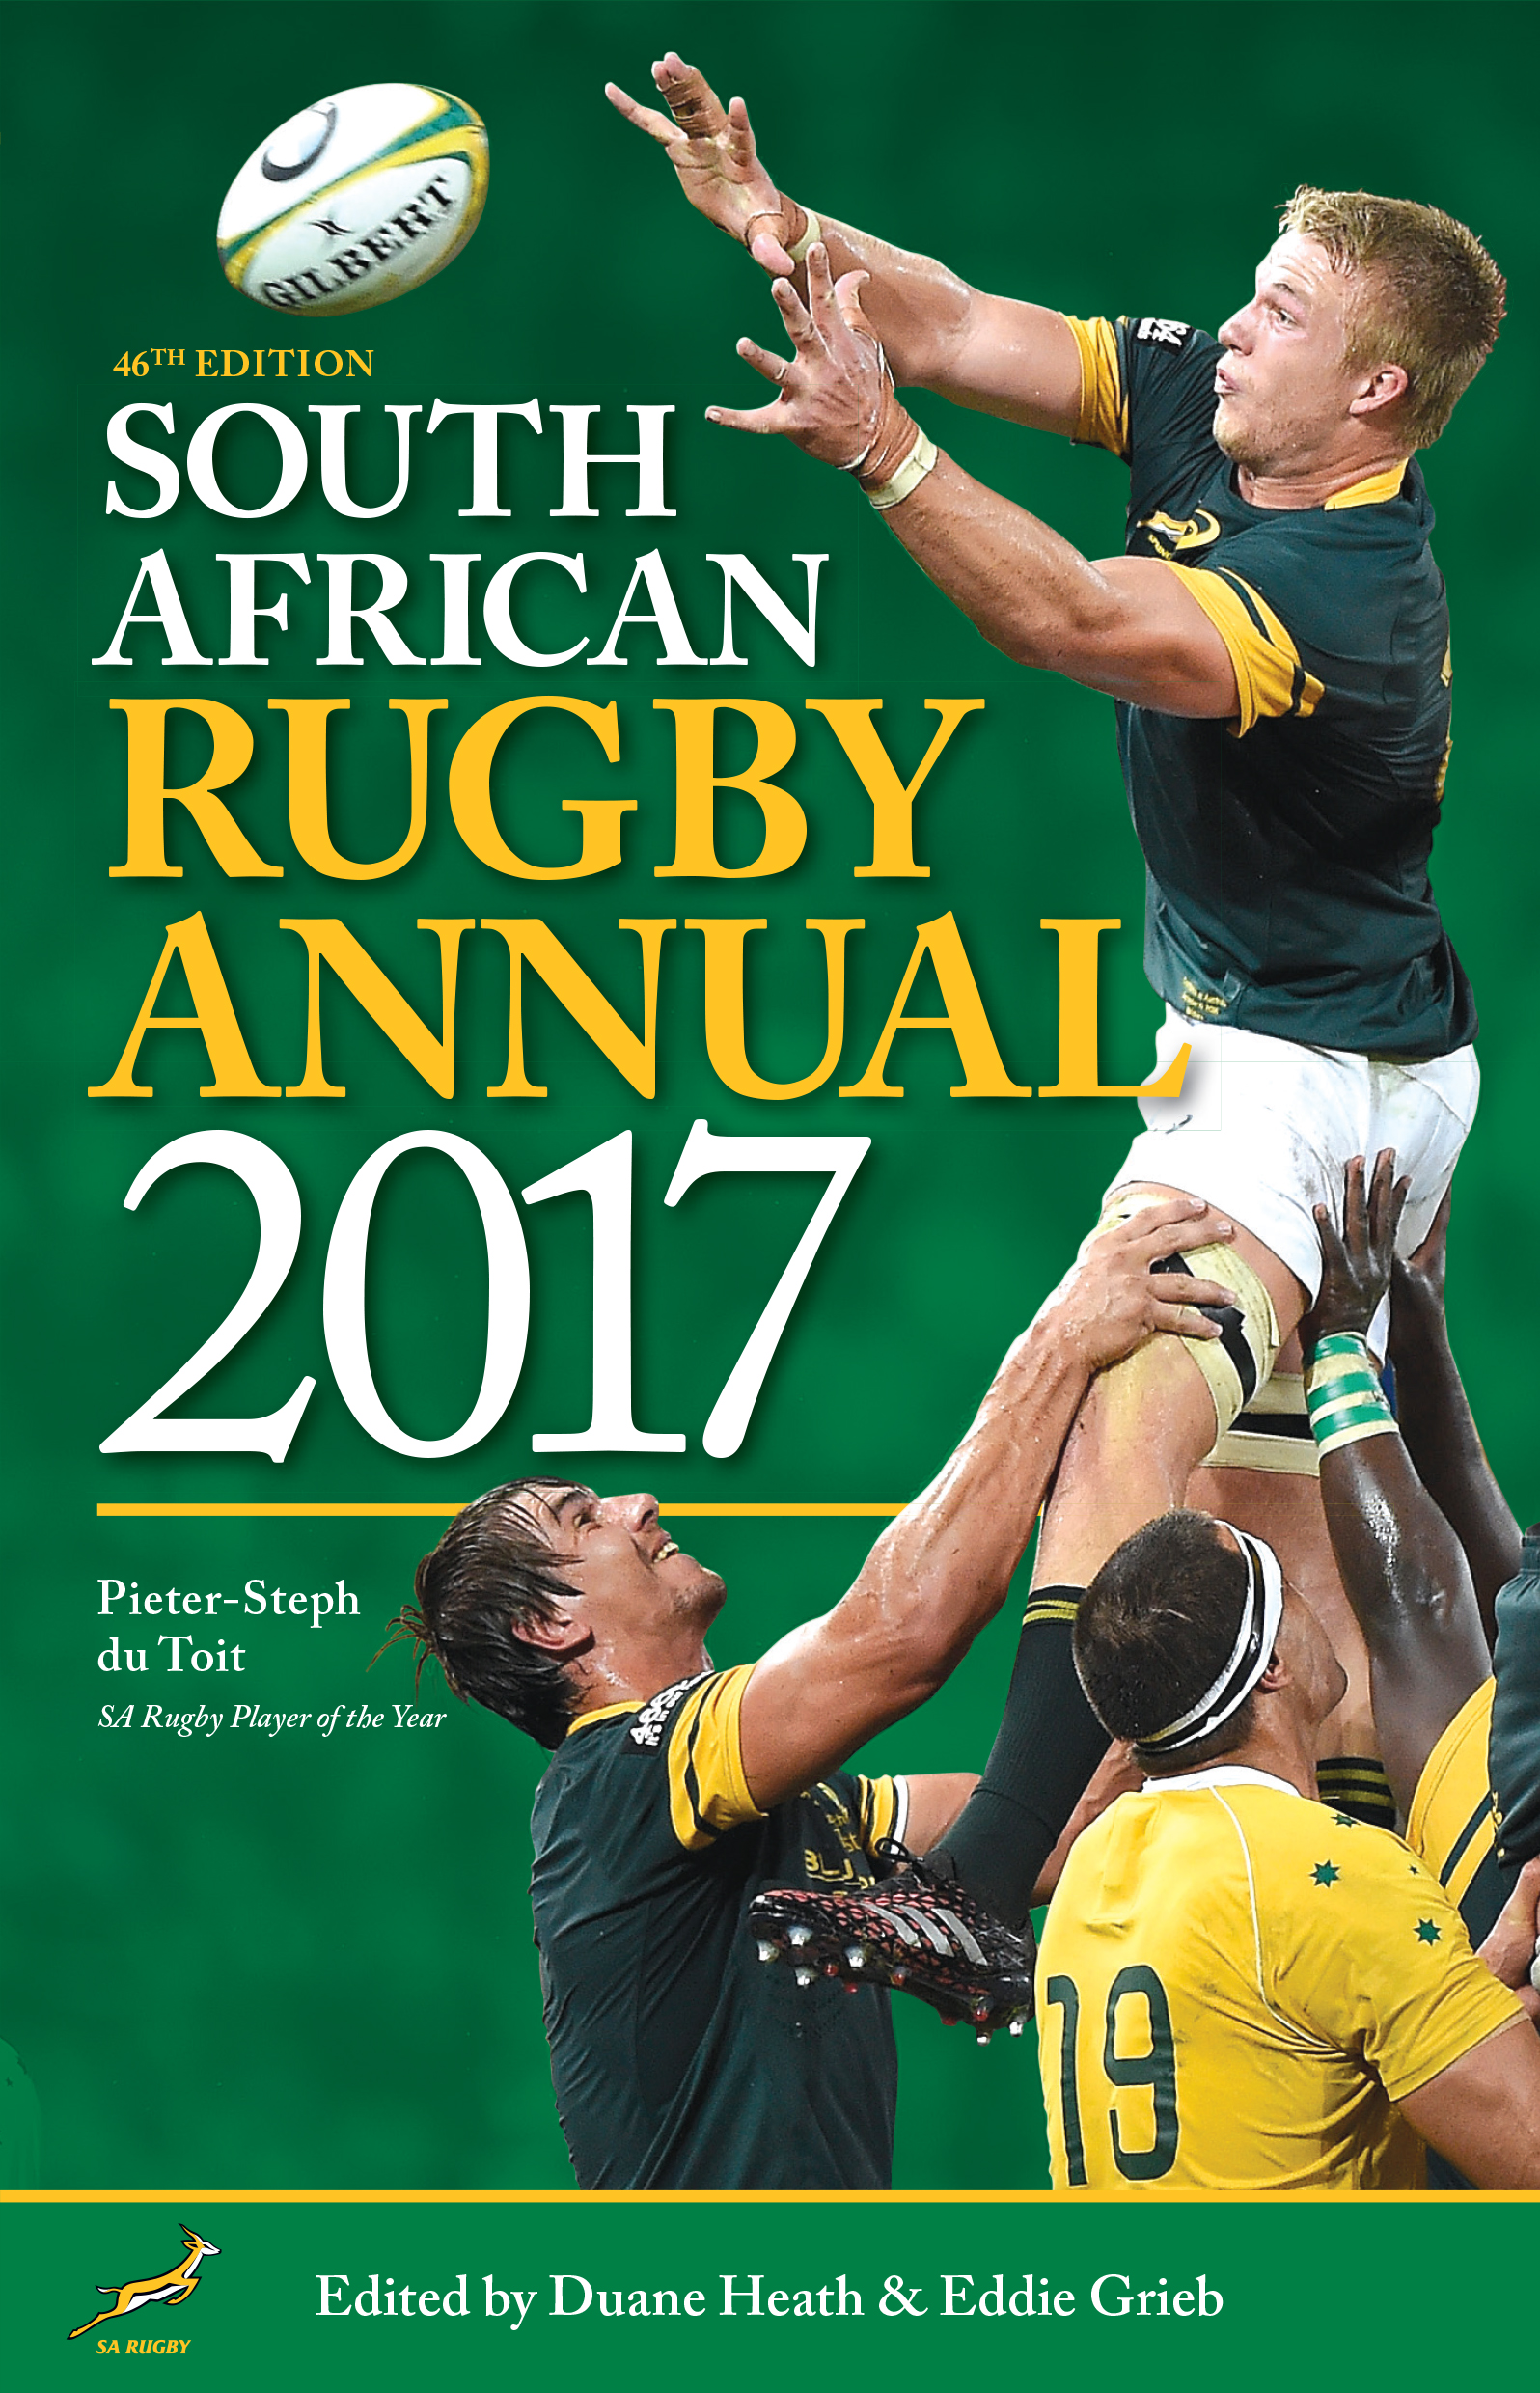 Book Review: SA Rugby Annual 2017